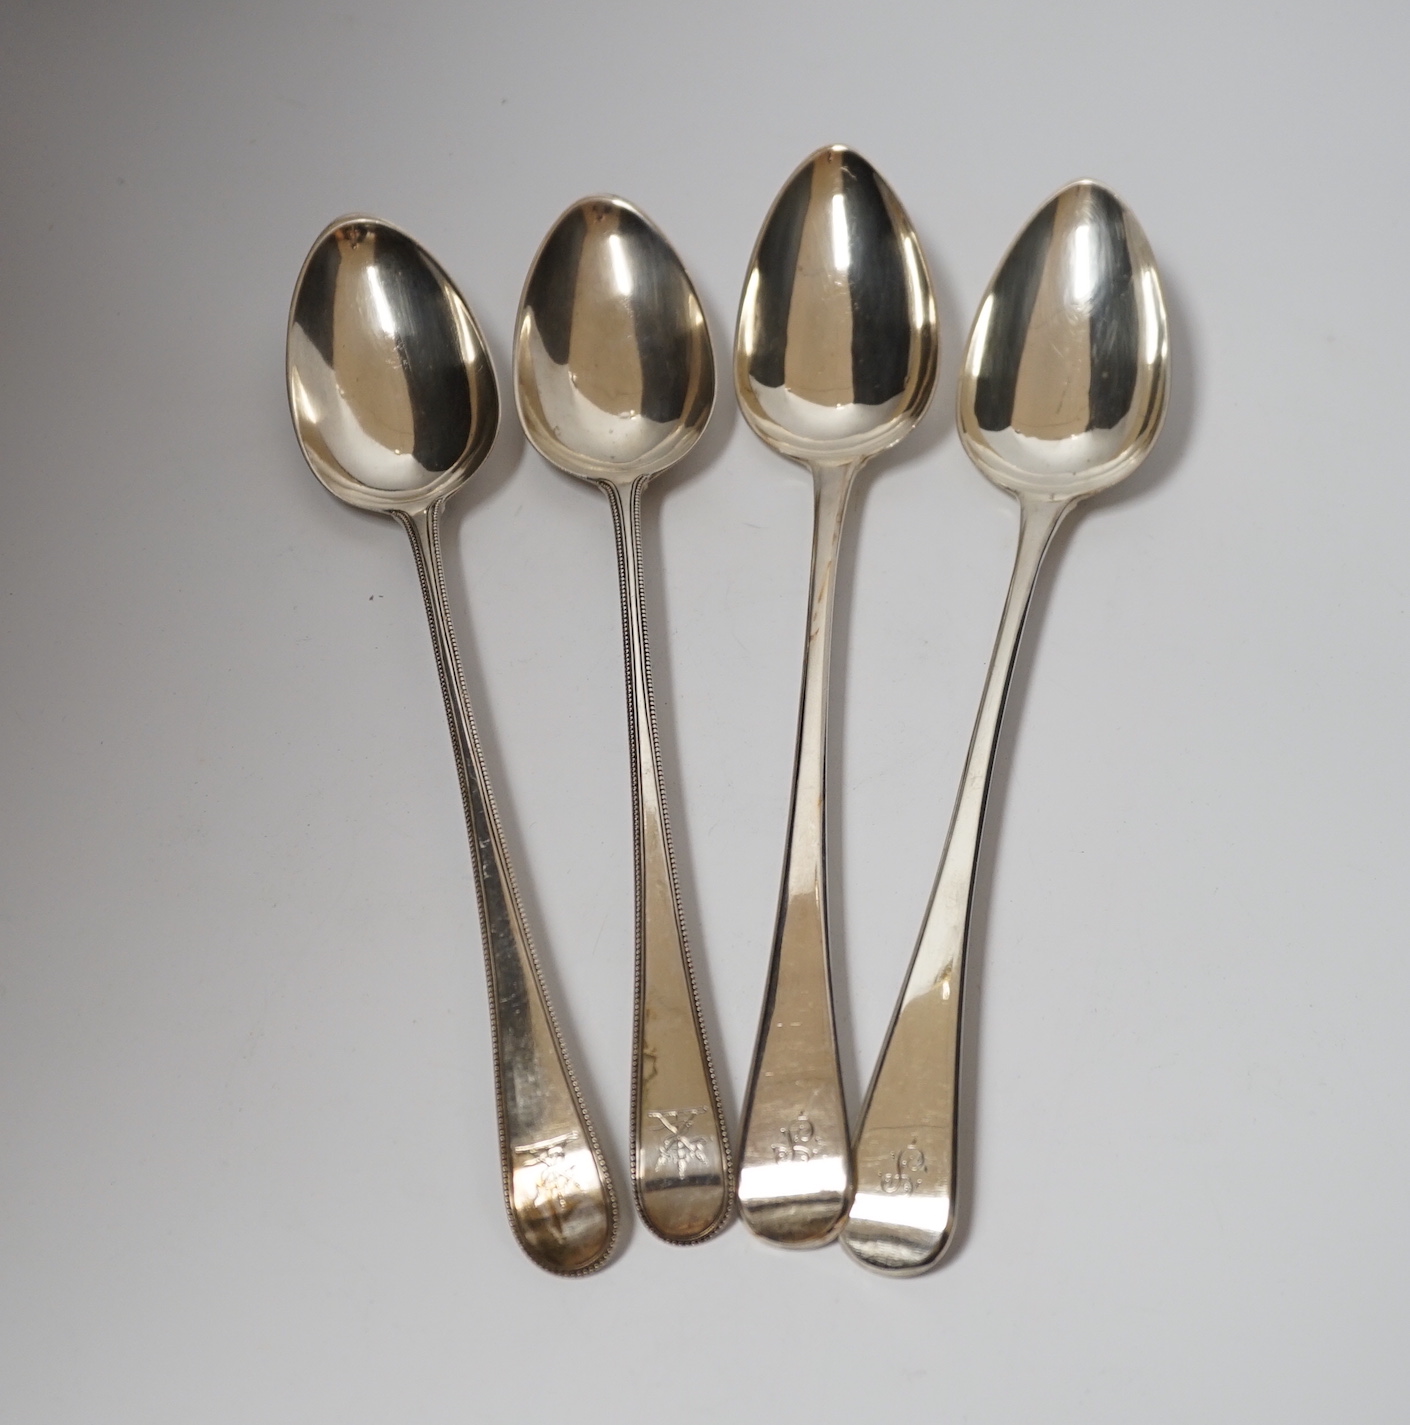 A pair of George III silver beaded Old English pattern basting spoons, George Smith III, London, 1785, 29.5cm and a later silver Old English pattern pair by Peter & William Bateman, 15oz.